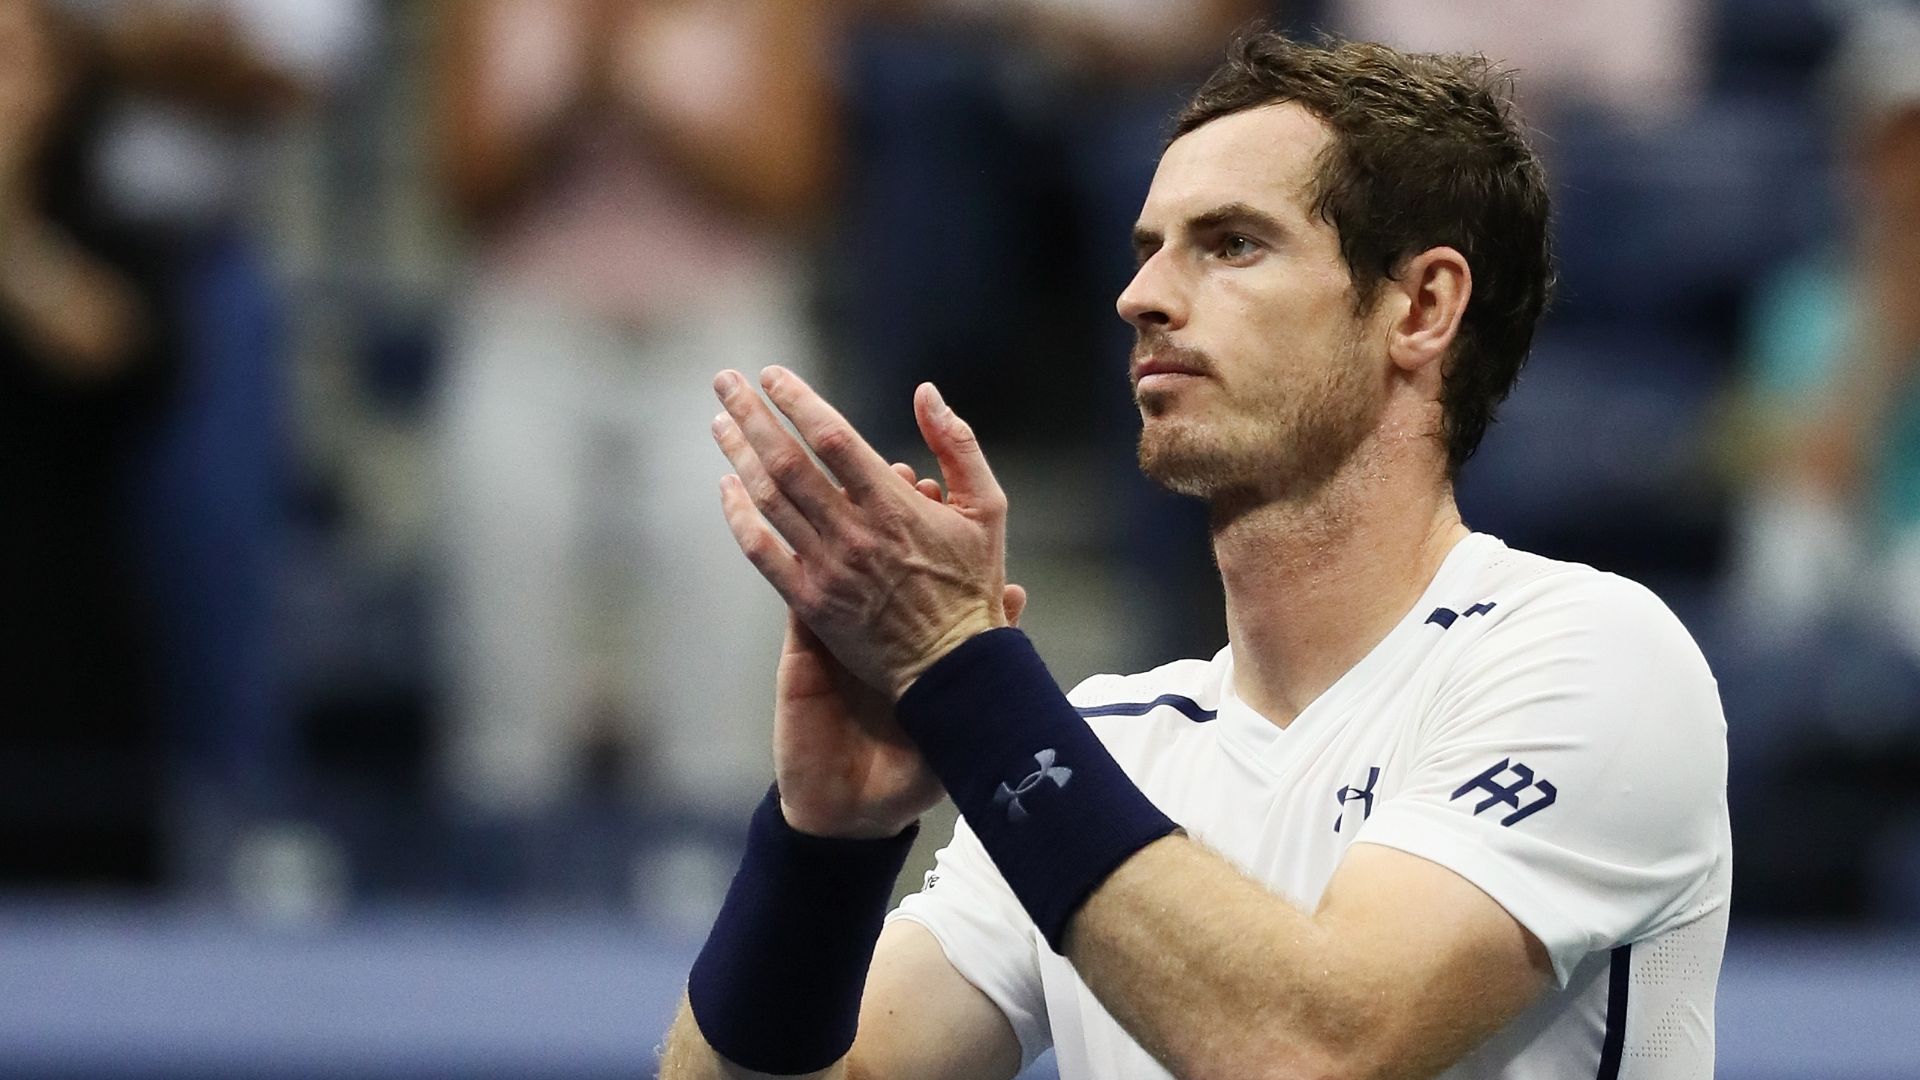 Murray moving great in win over Granollers